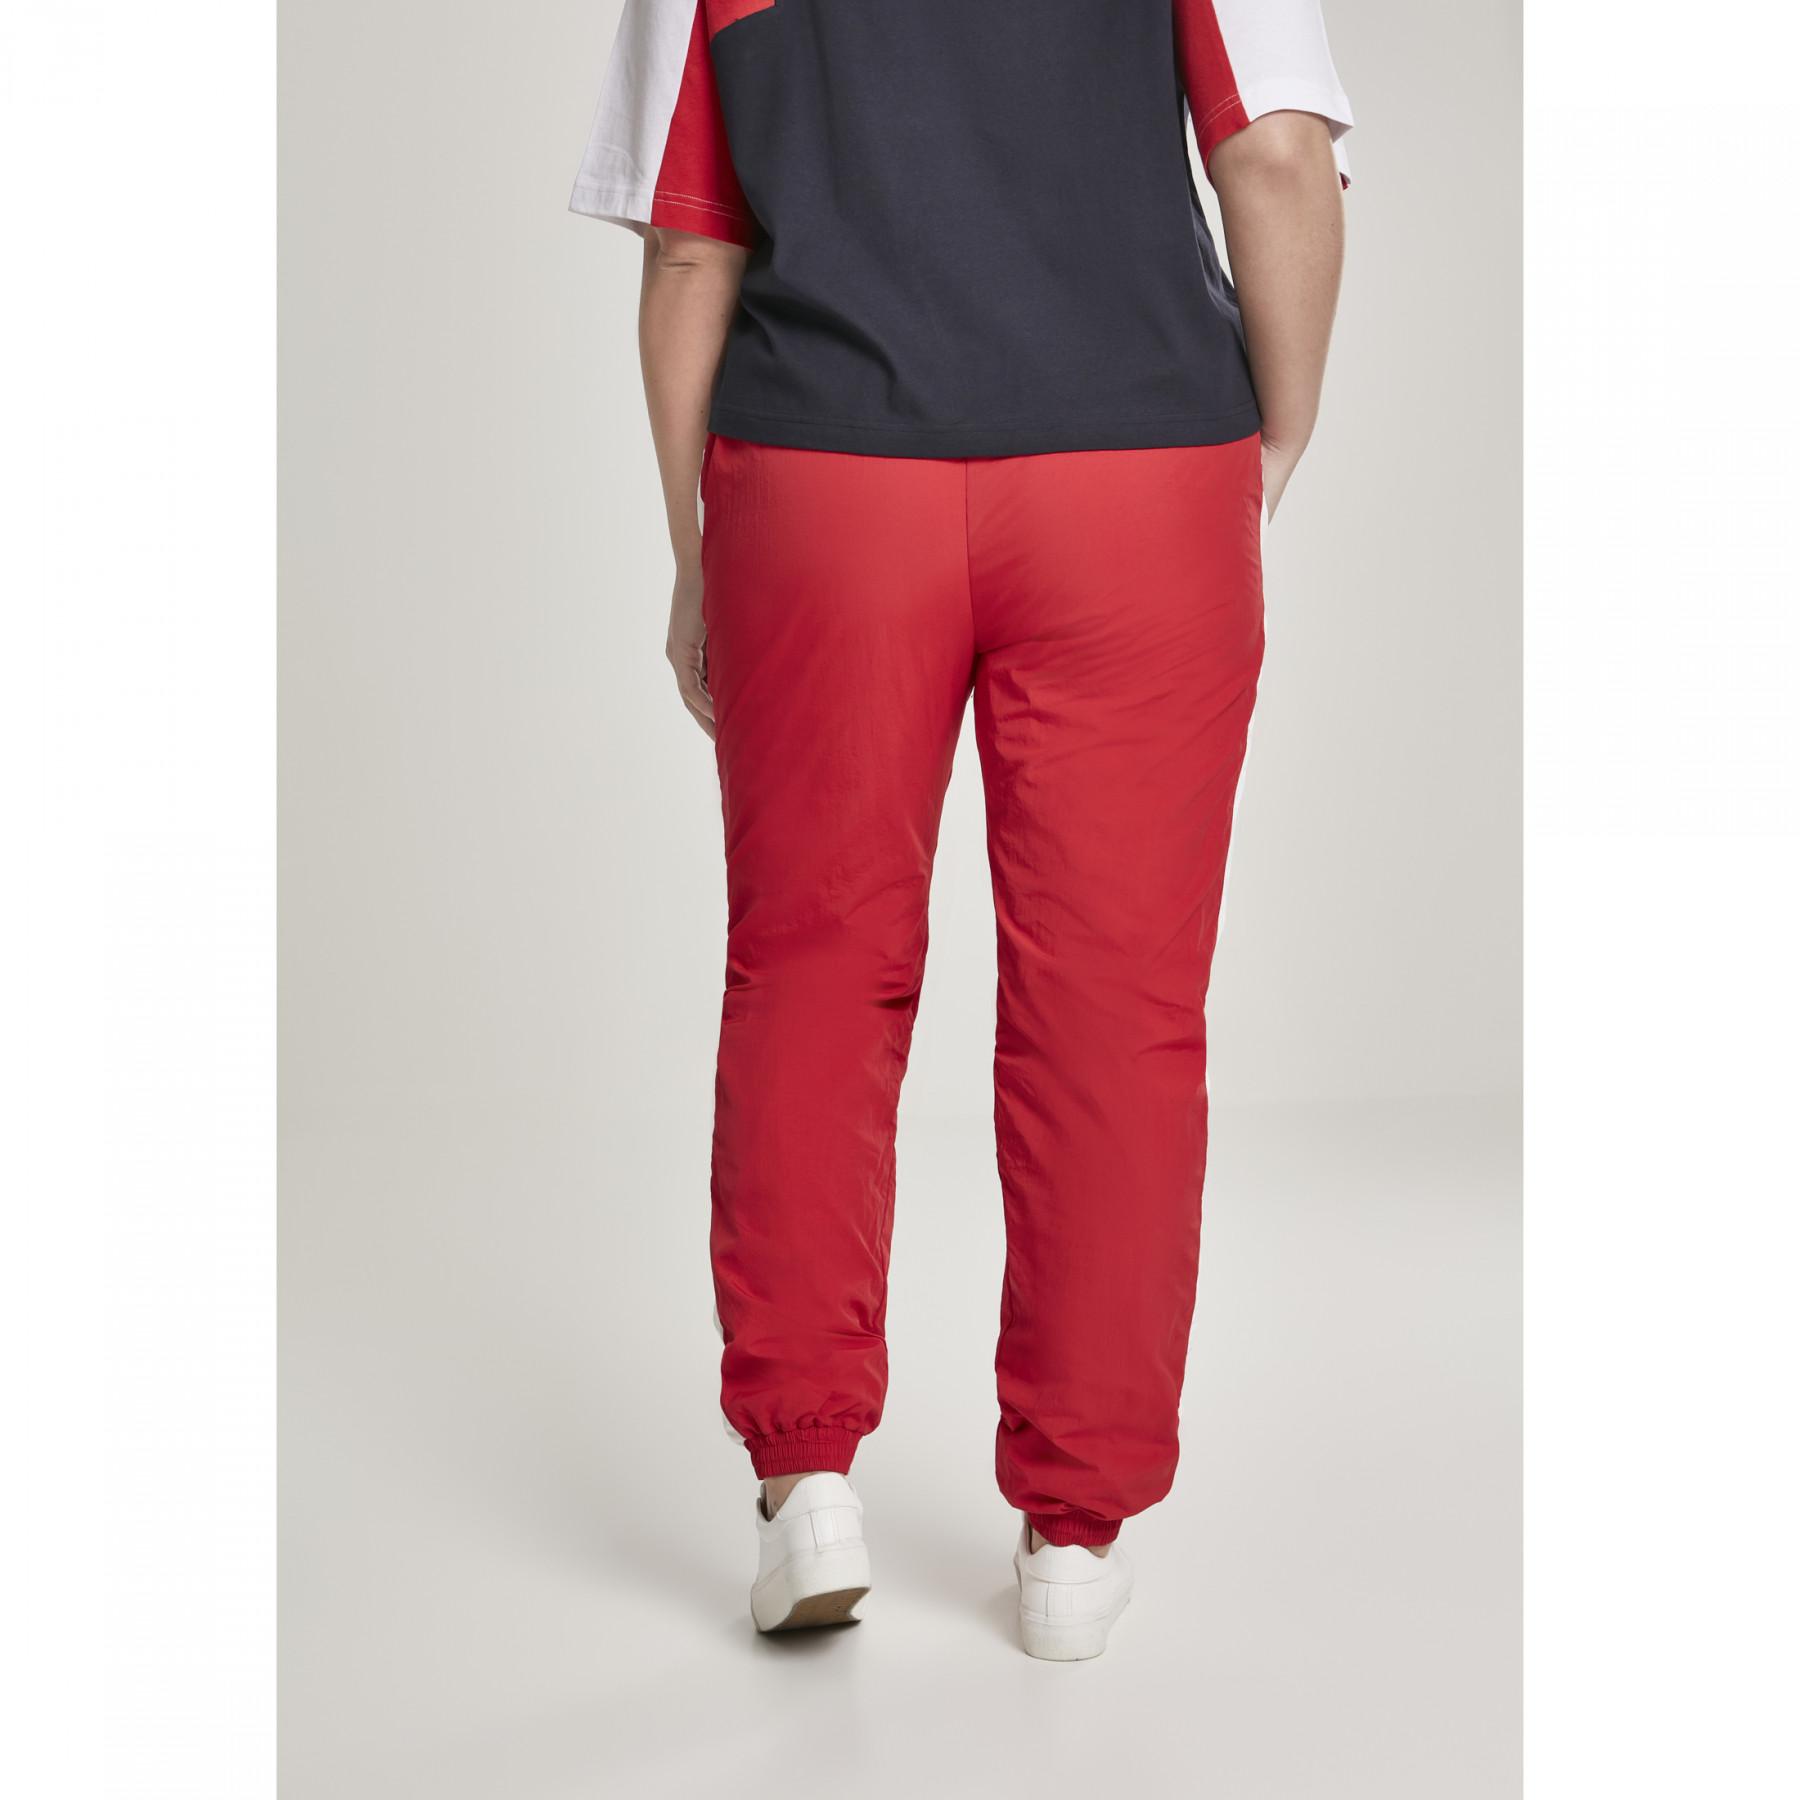 Pant donna Urban Classic a righe crinkle GT